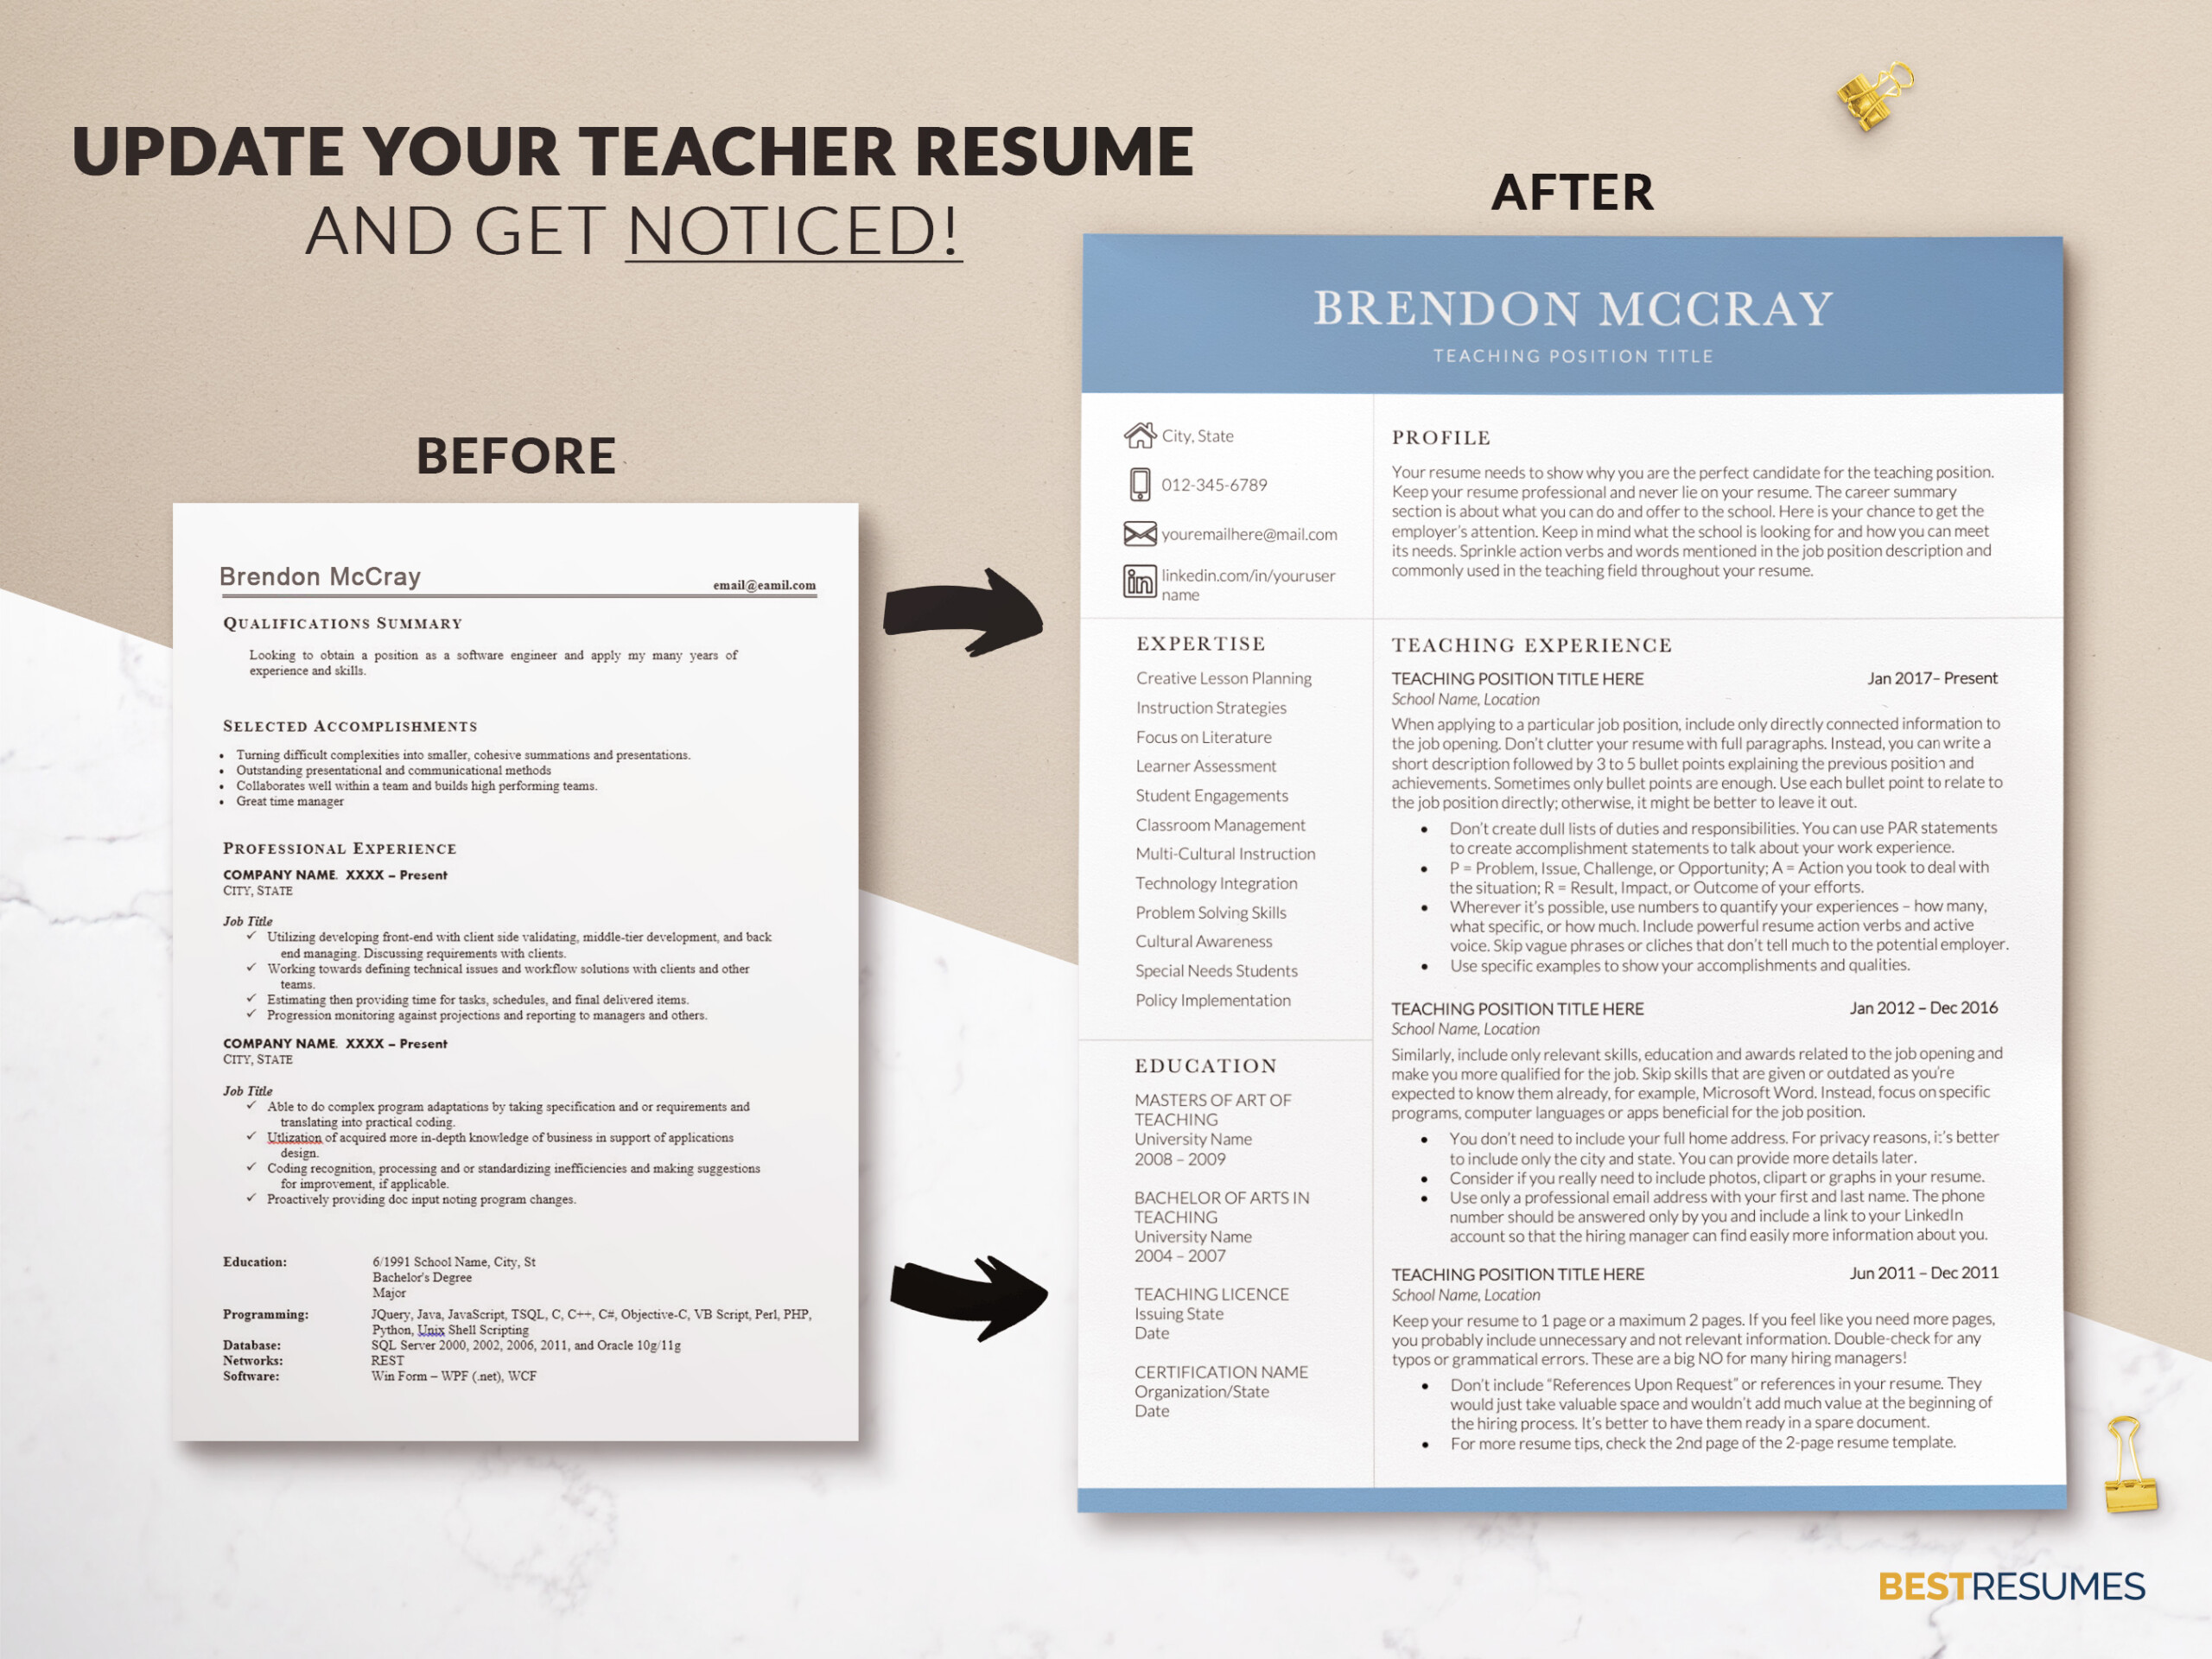 Two Column Resume for Teaching Job and Cover Letter Update your Teacher Resume Brendon McCray